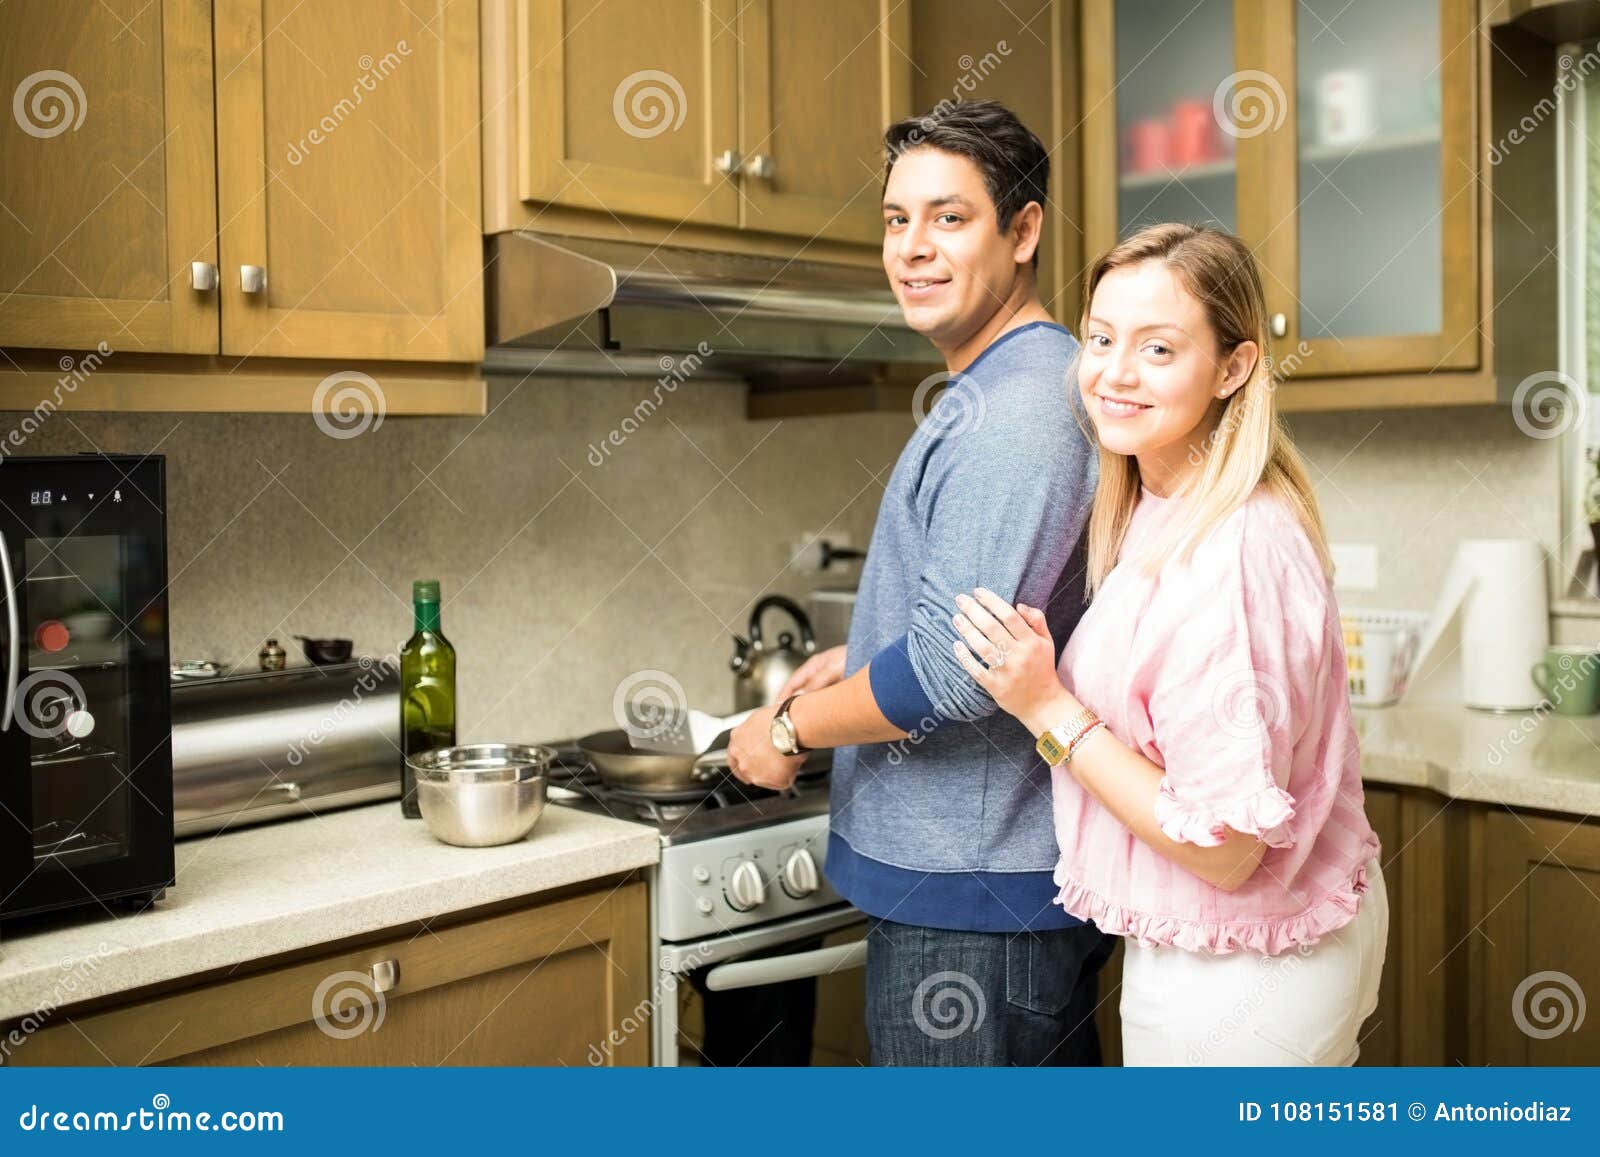 Attractive Couple Cooking In The Kitchen Stock Image Im